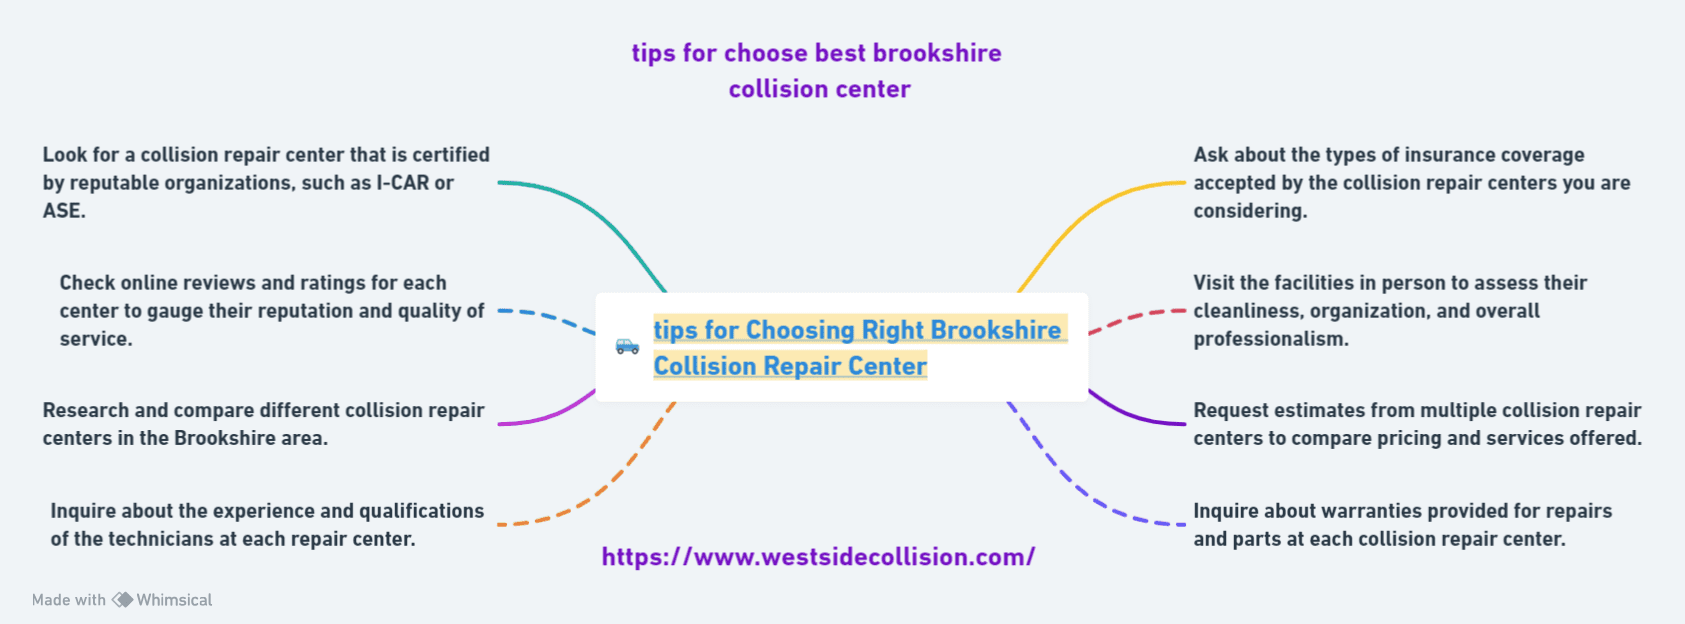 tips for choosing the best Brookshire collision center